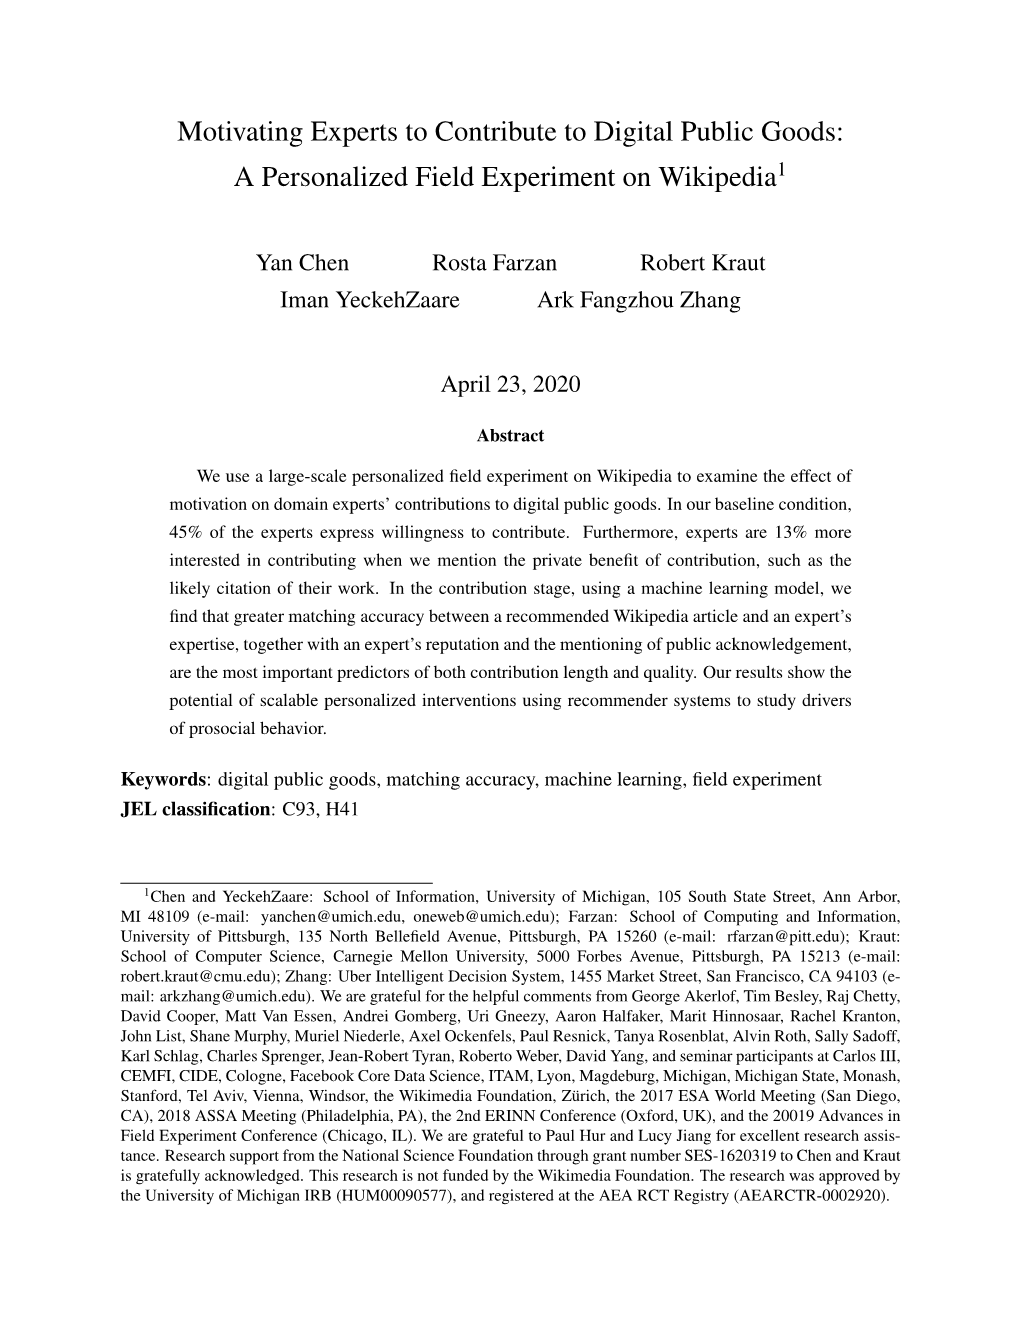 Motivating Experts to Contribute to Digital Public Goods: a Personalized Field Experiment on Wikipedia1